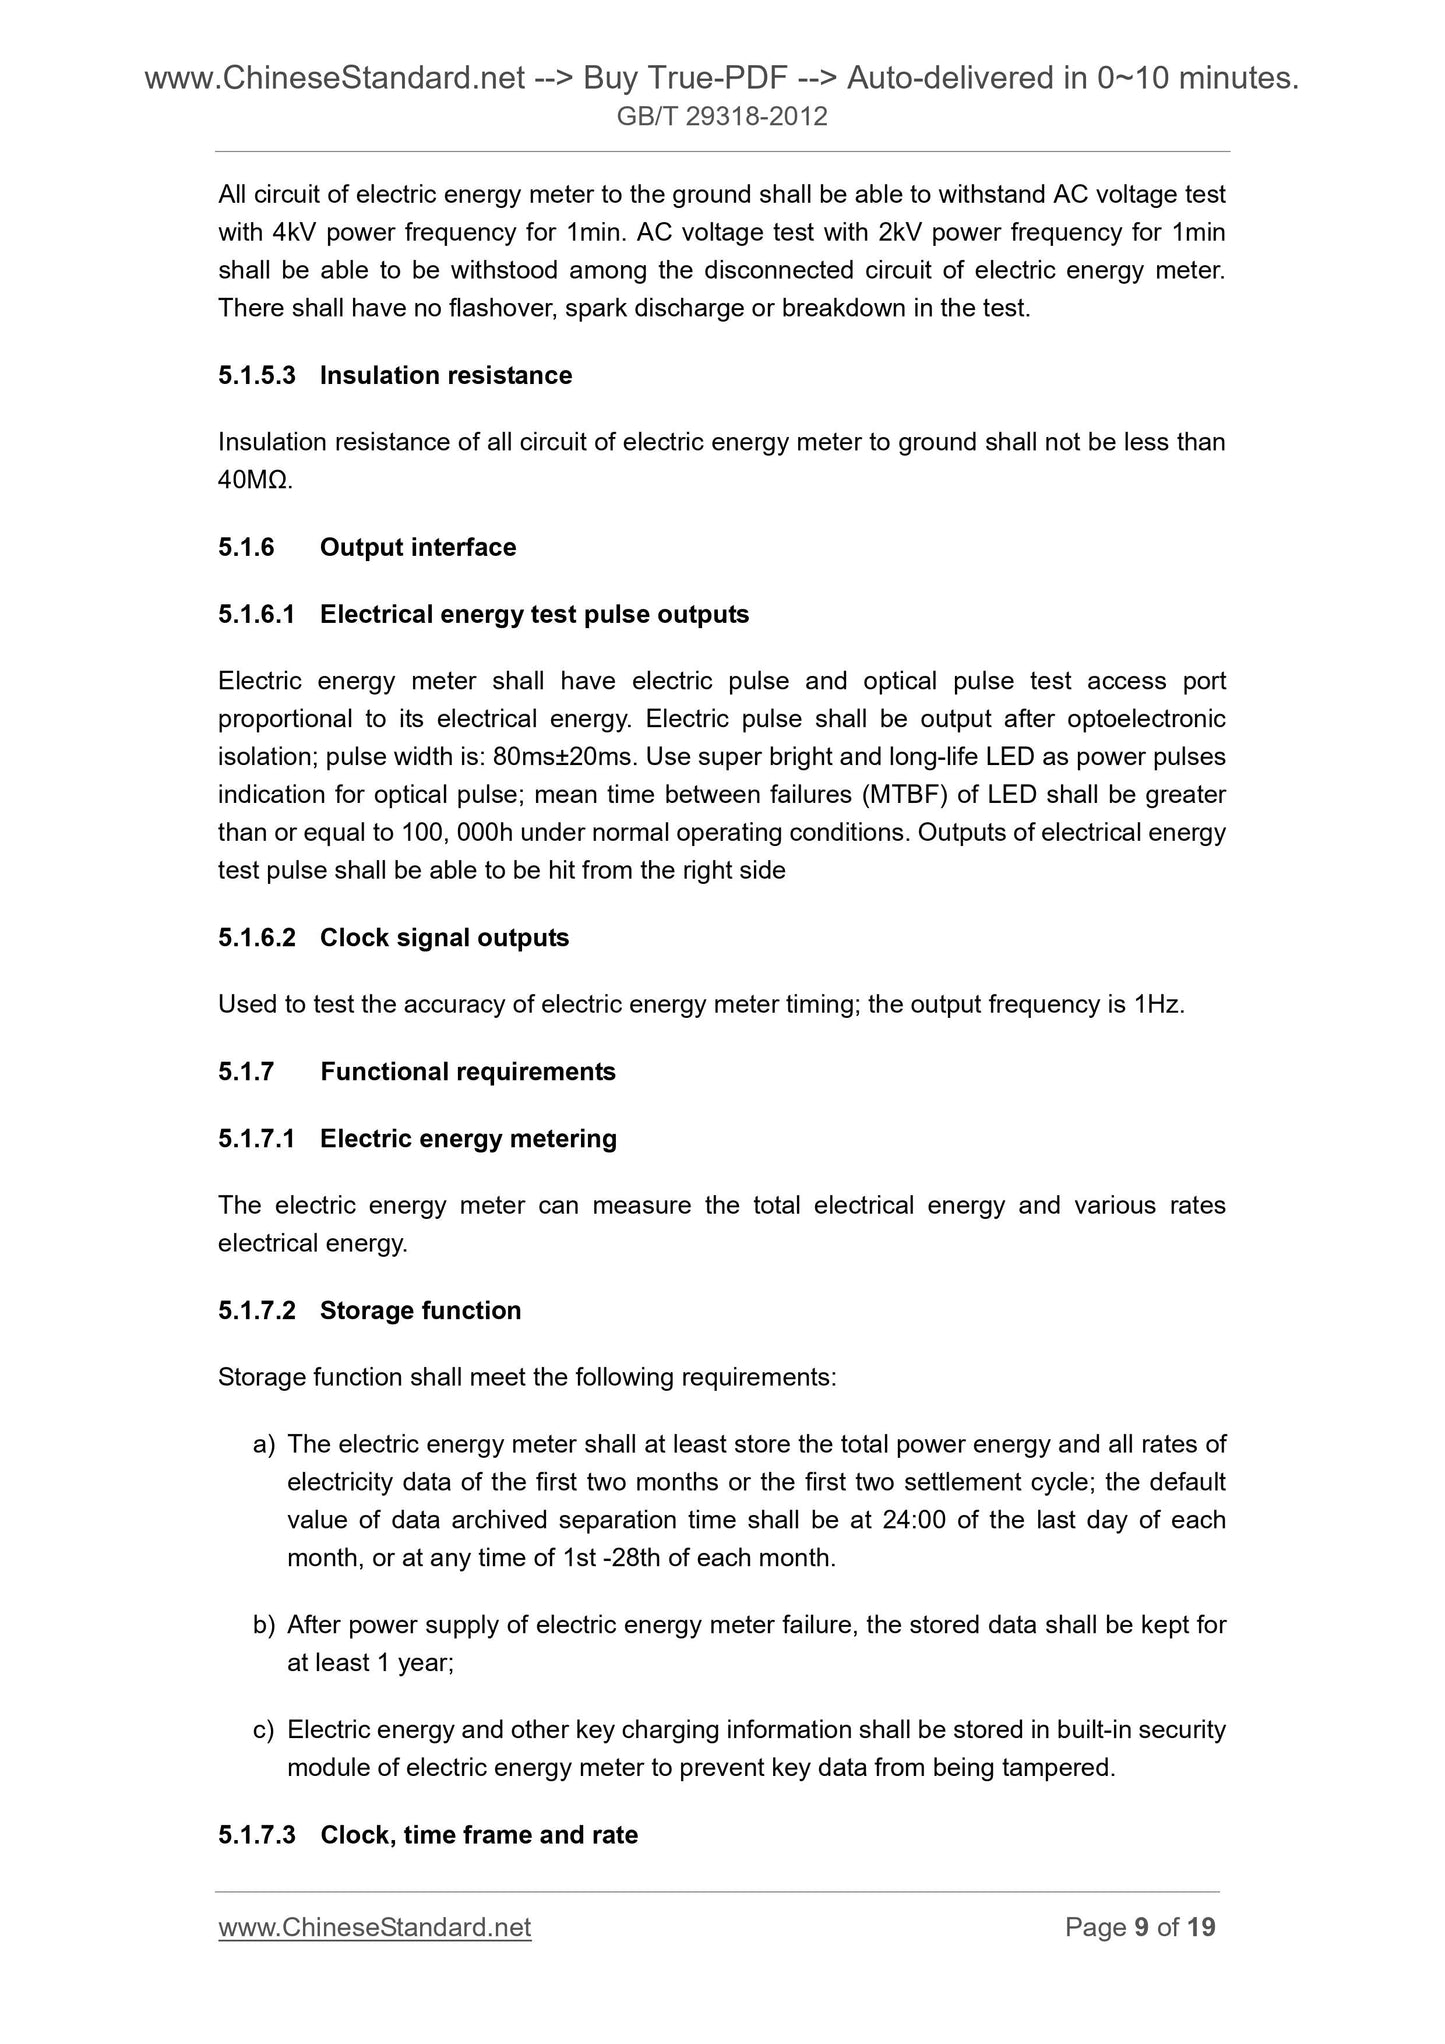 GB/T 29318-2012 Page 6